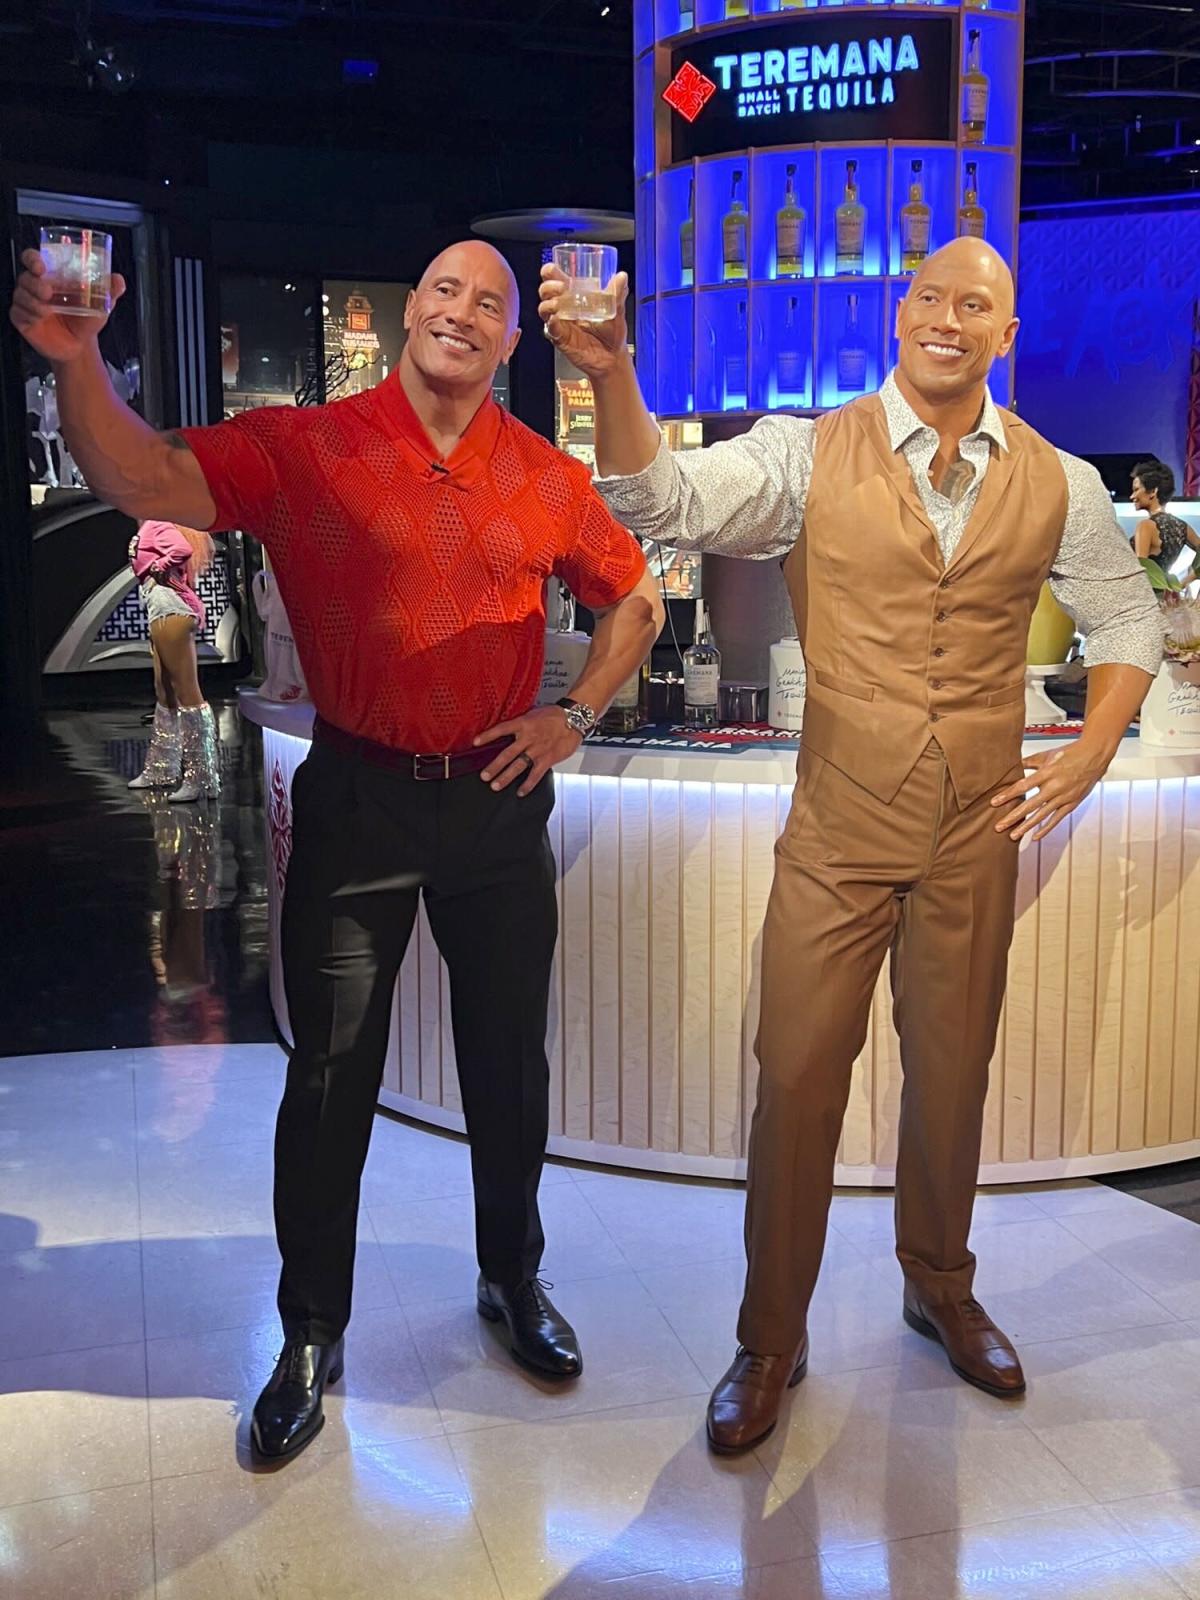 Dwayne Johnson takes over Vegas with Madame Tussauds fan visit ...